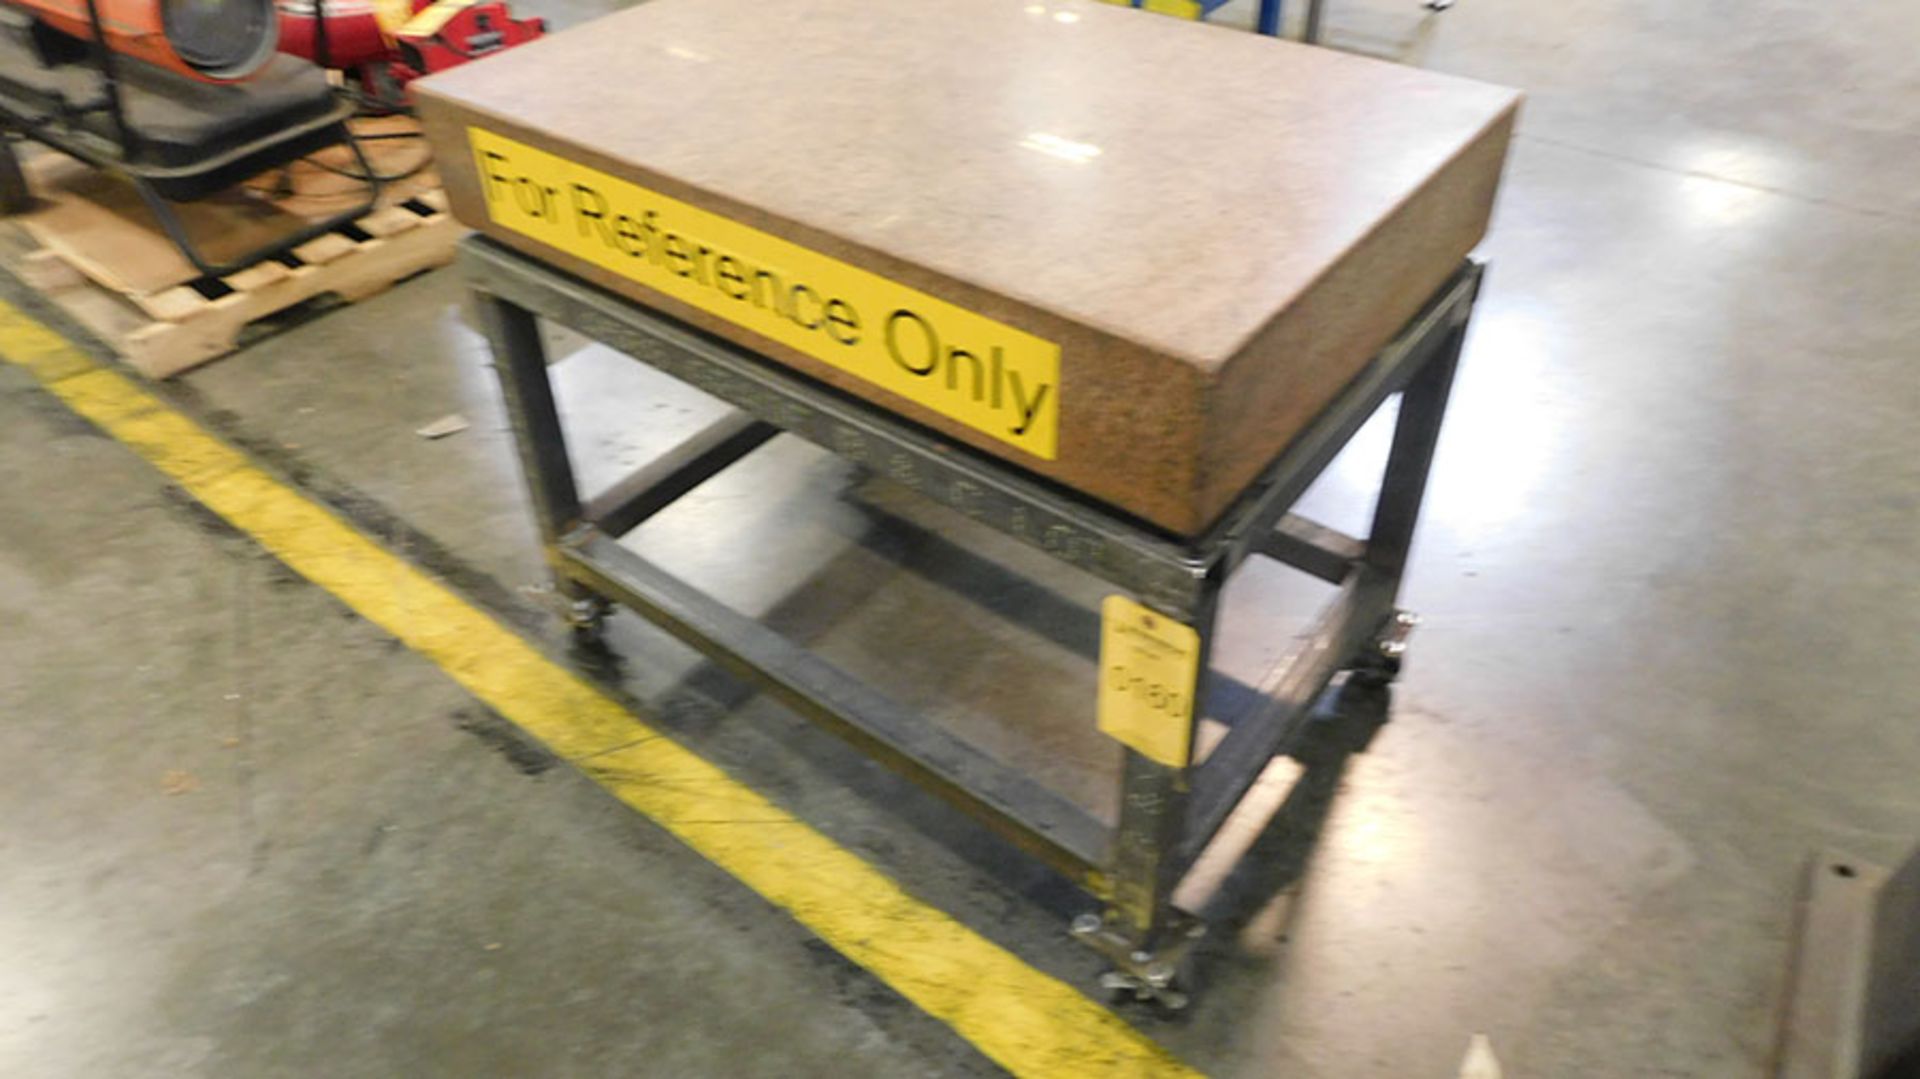 3' X 2' GRANITE SURFACE PLATE ON ROLLING STAND - Image 2 of 2